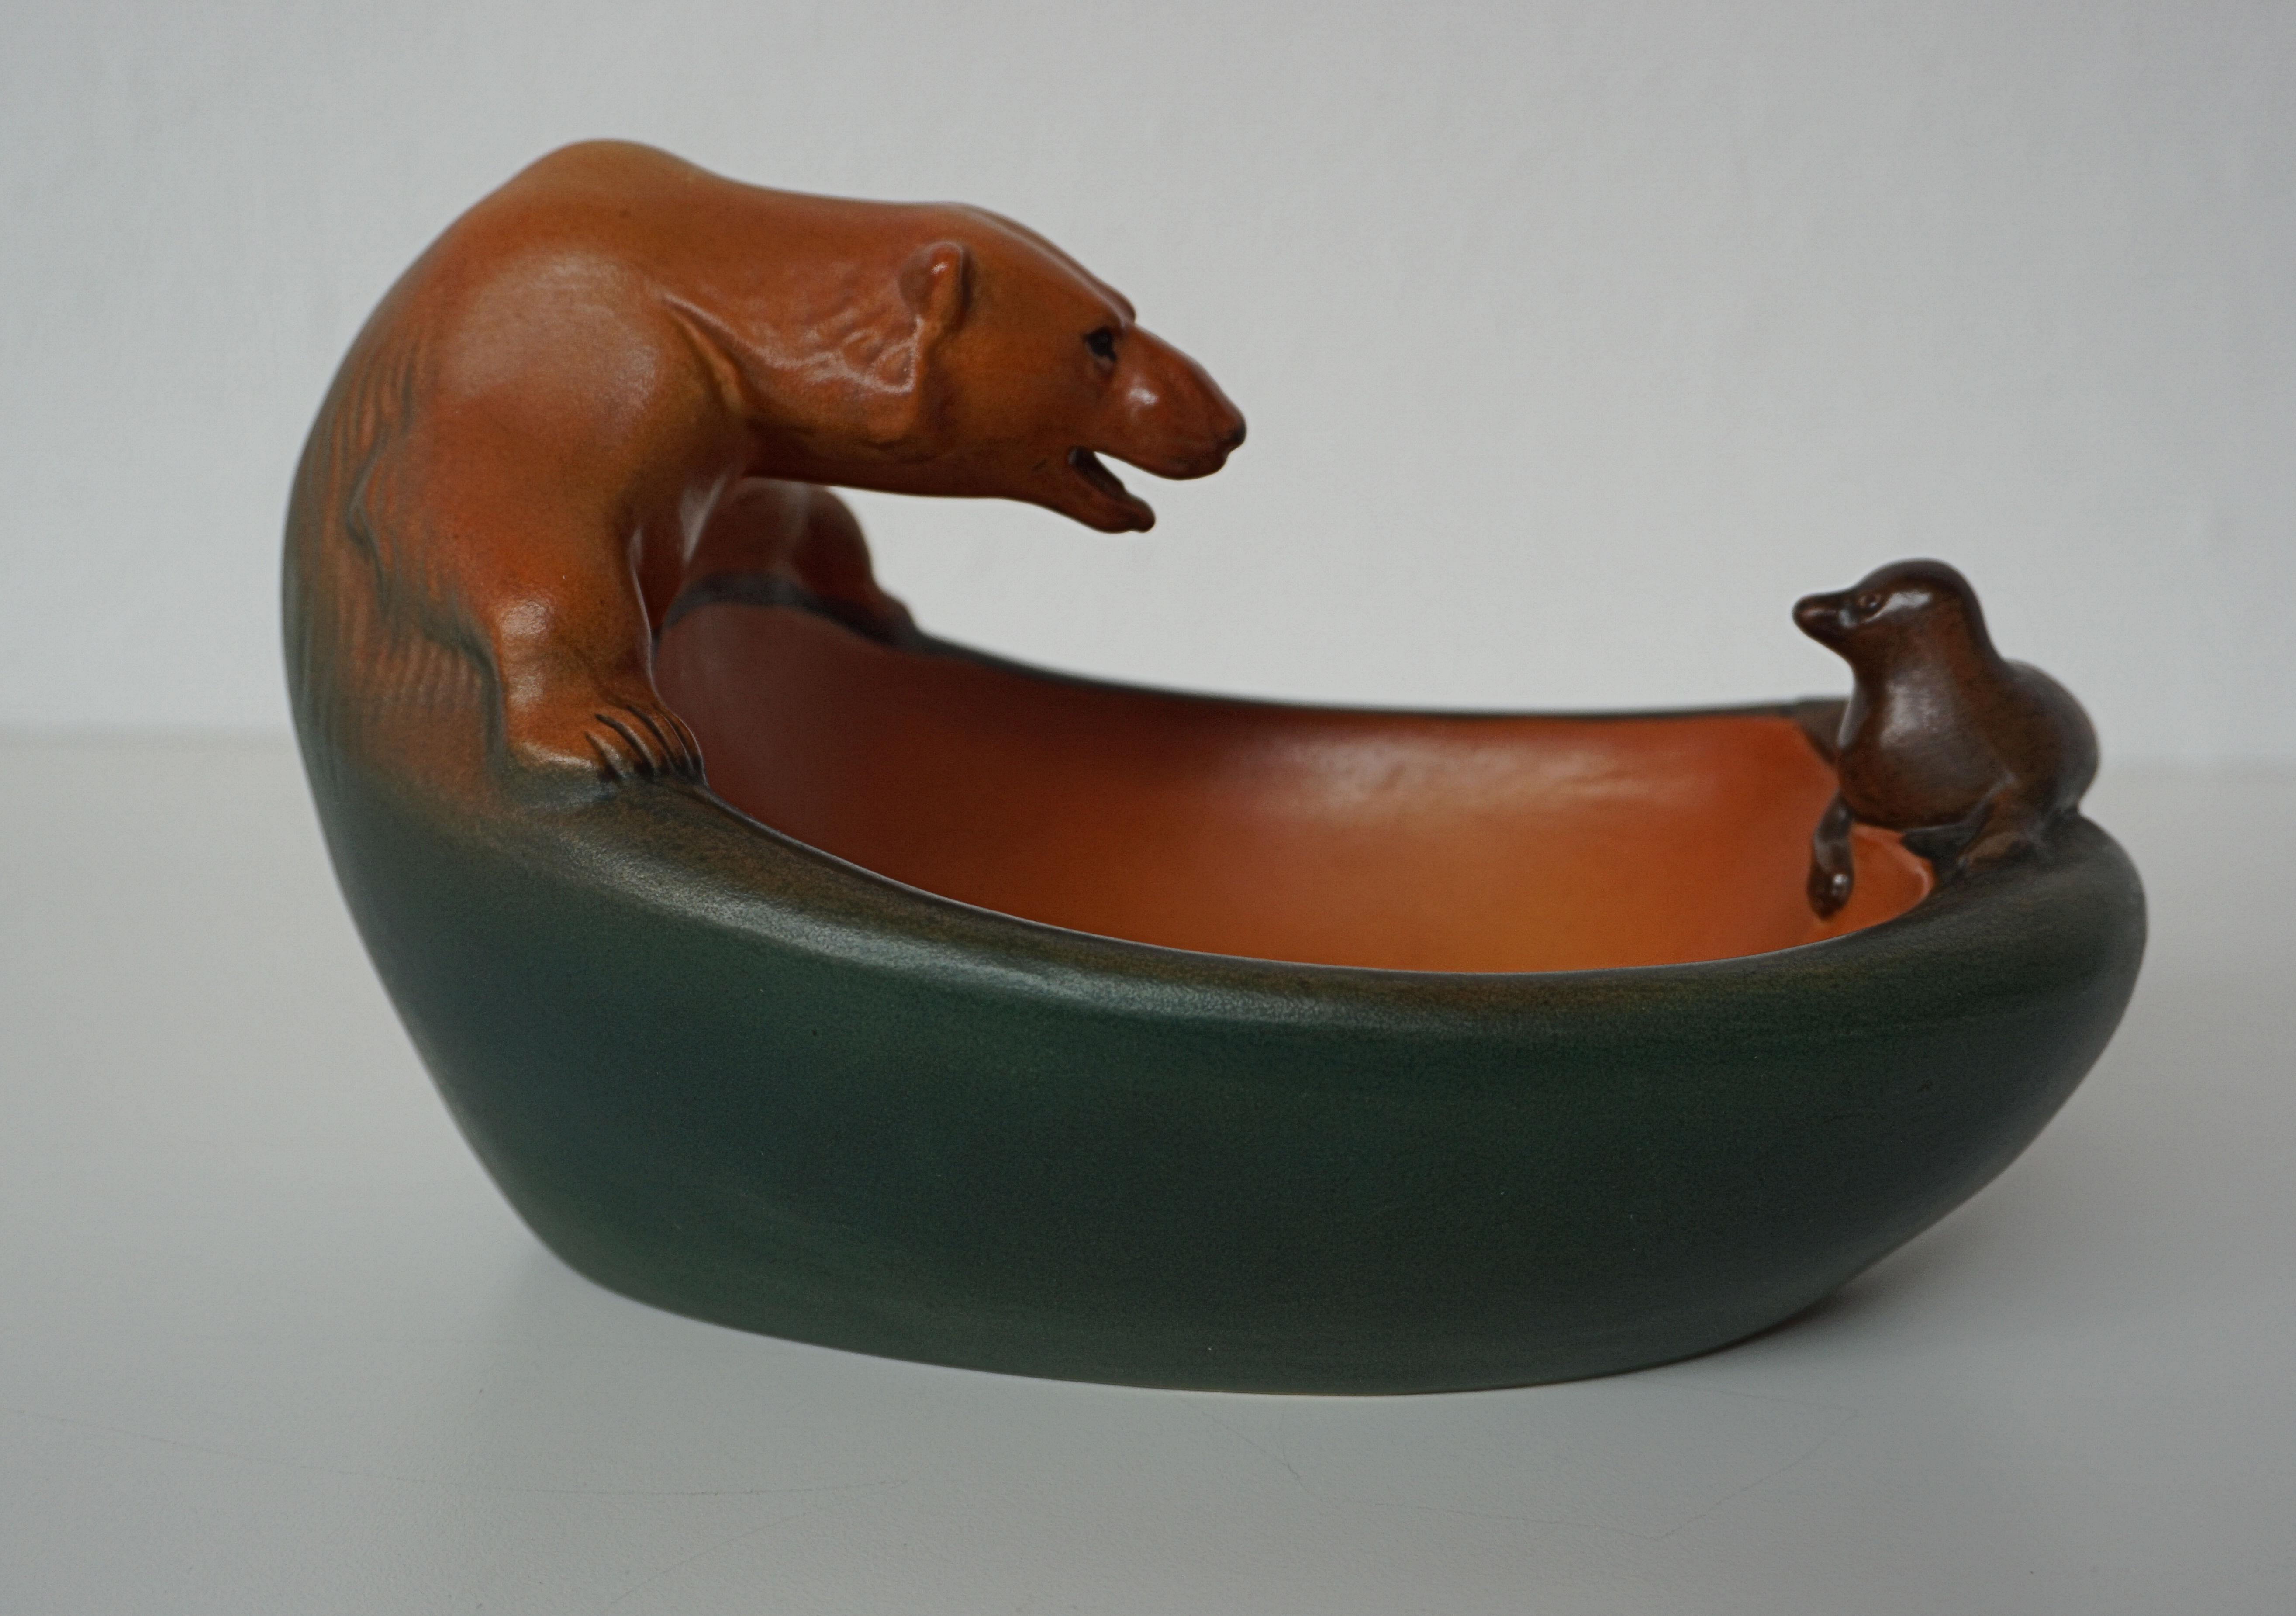 Danish Art Nouveau Handcrafted Icebear and Seal Bowl by P. Ipsens Enke In Good Condition For Sale In Knebel, DK